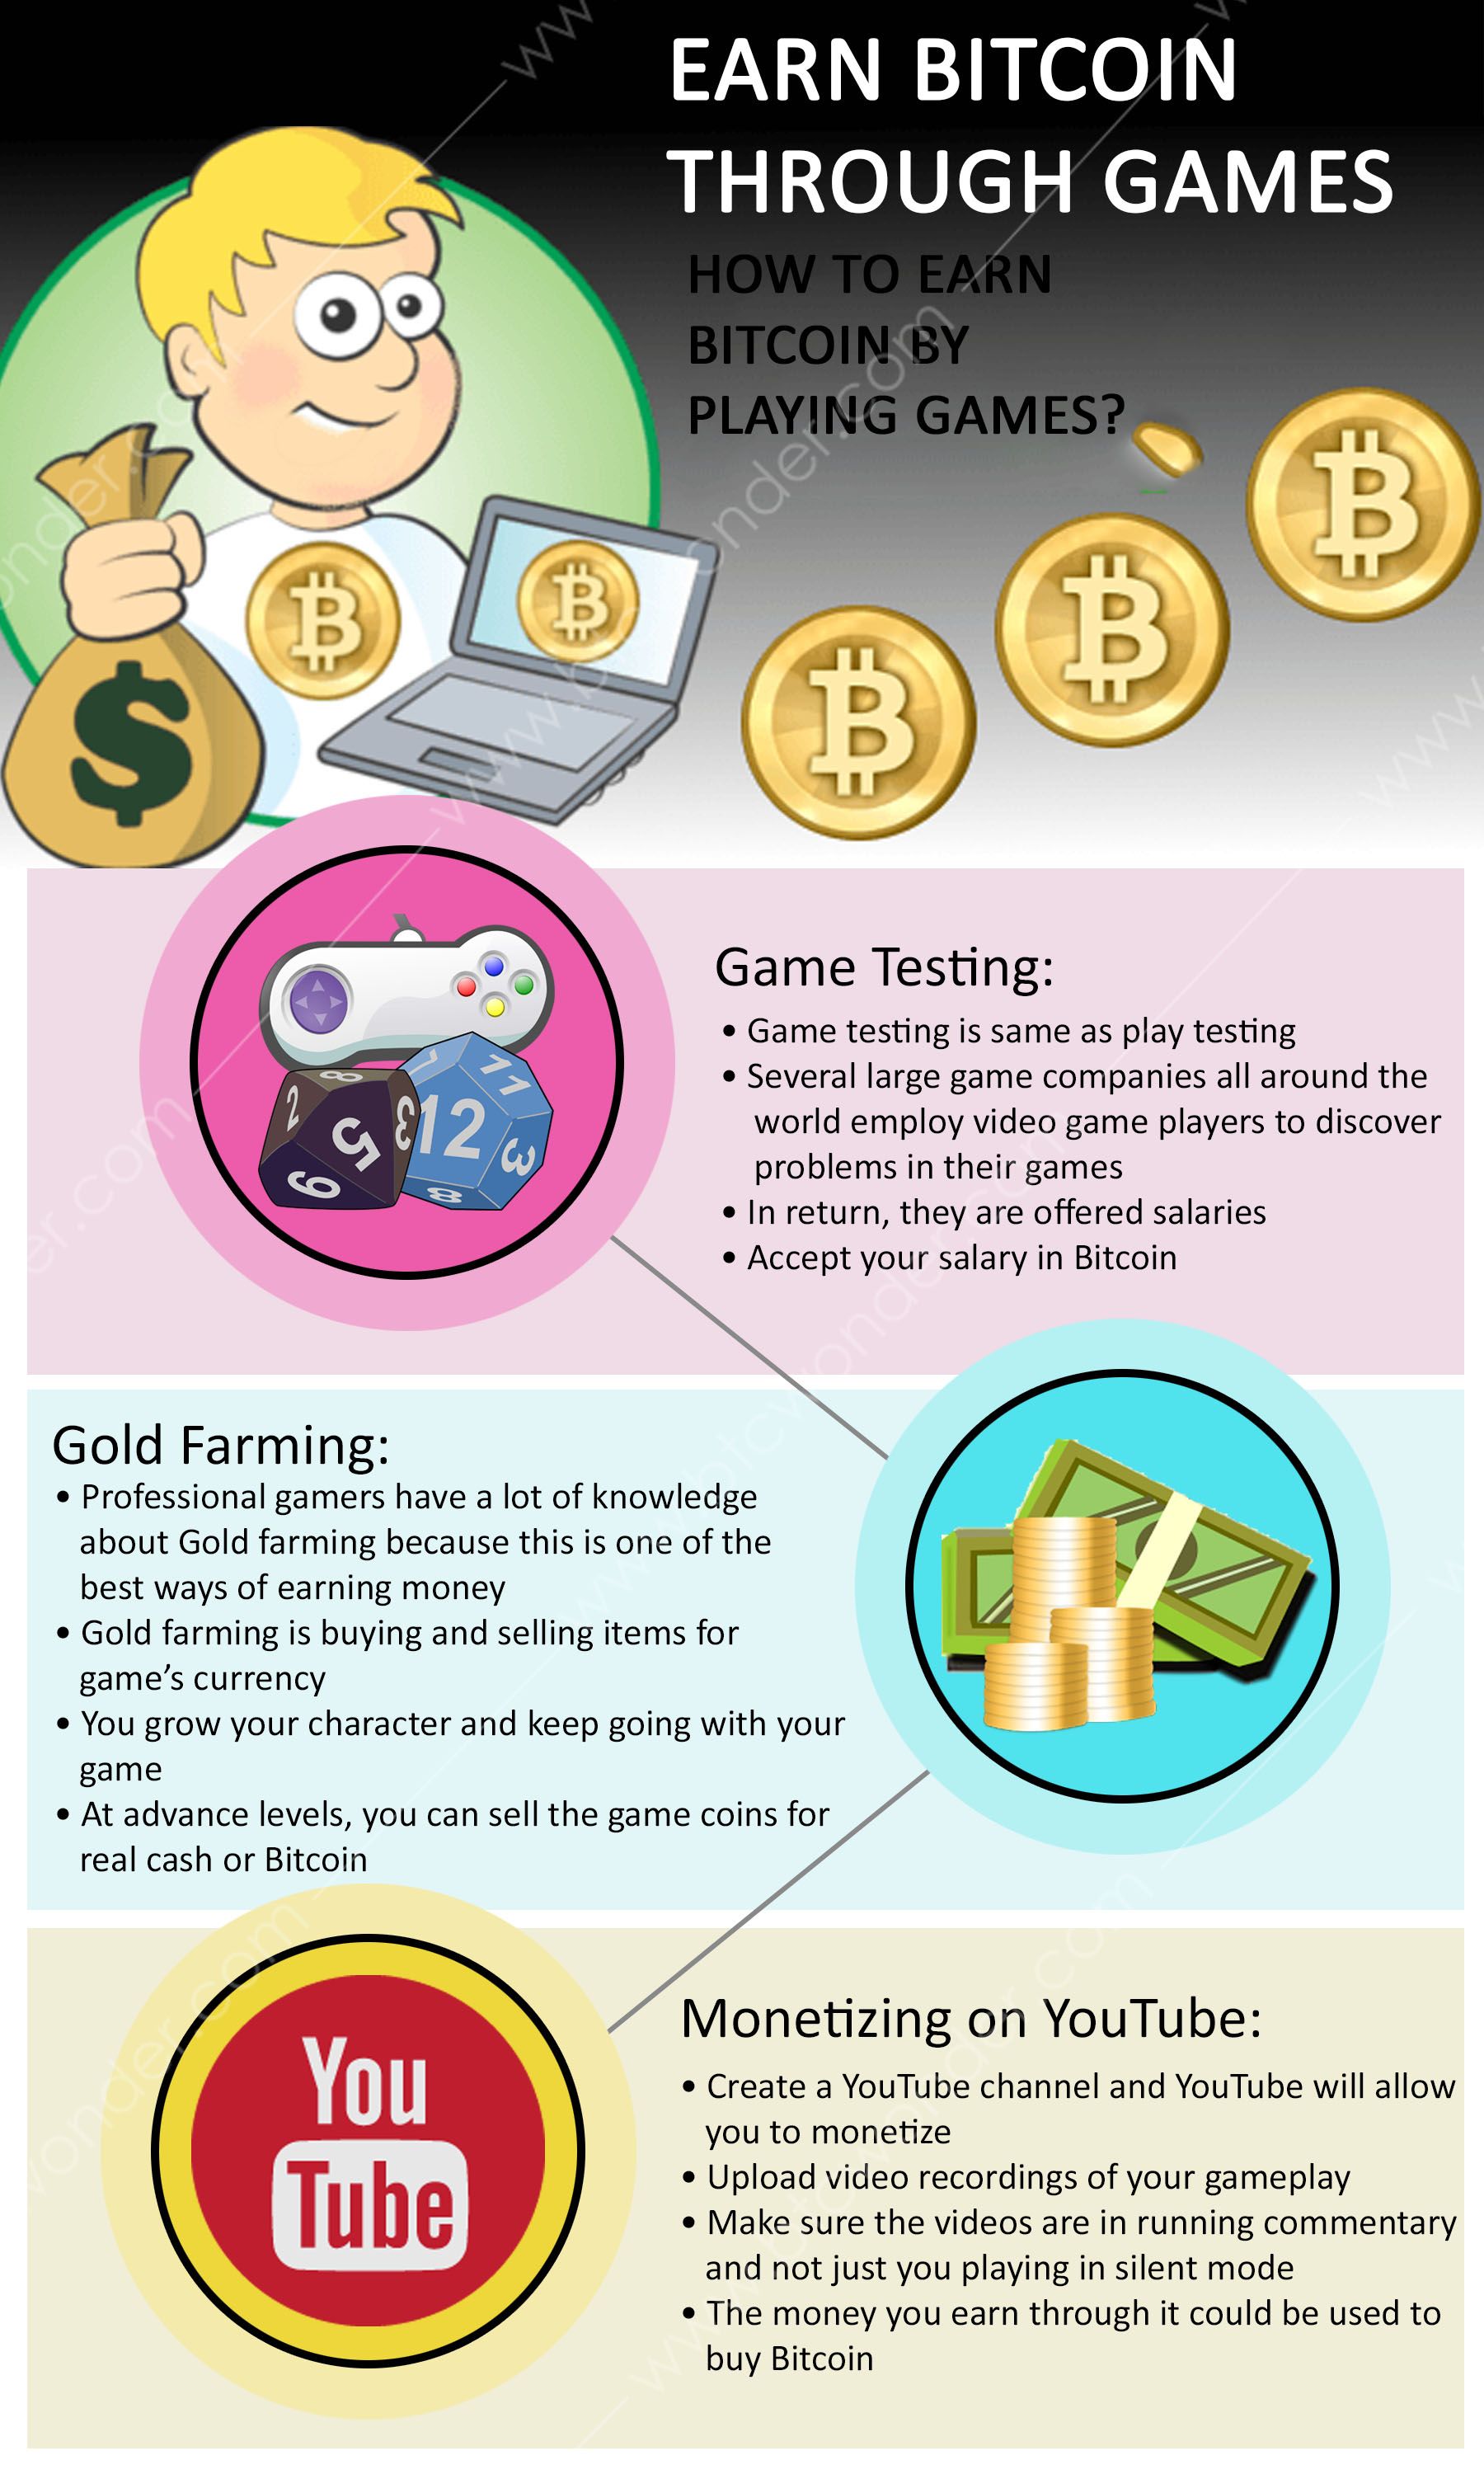 Playing games for bitcoin